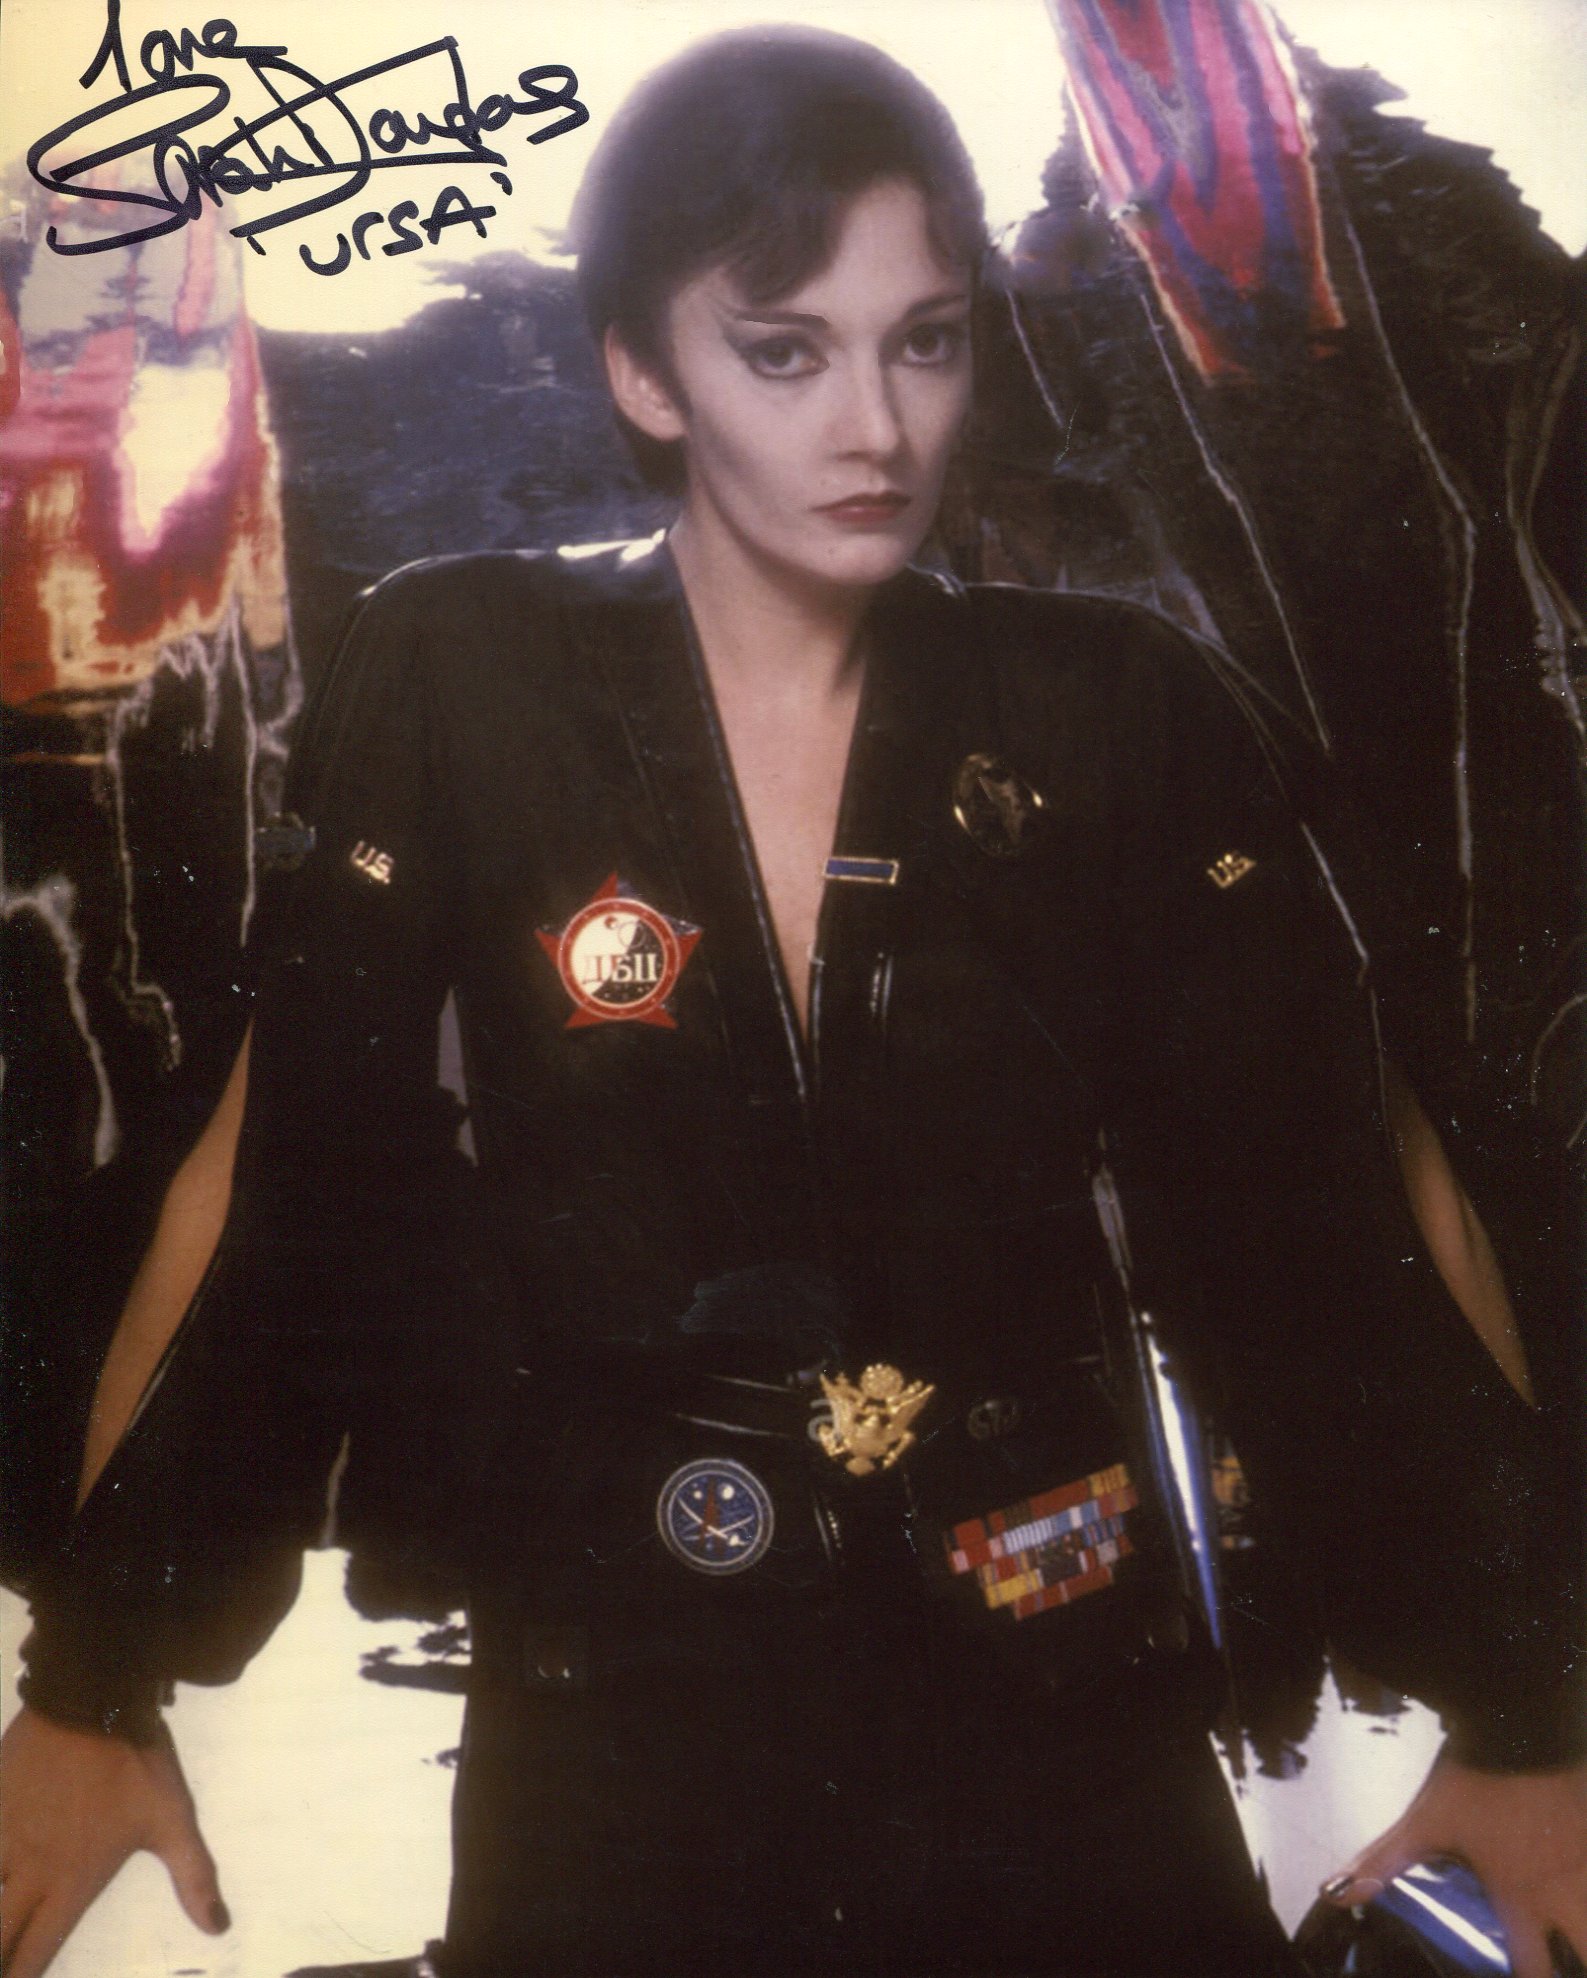 Superman 2 movie photo signed by actress Sarah Douglas who played Ursa. Good condition. All